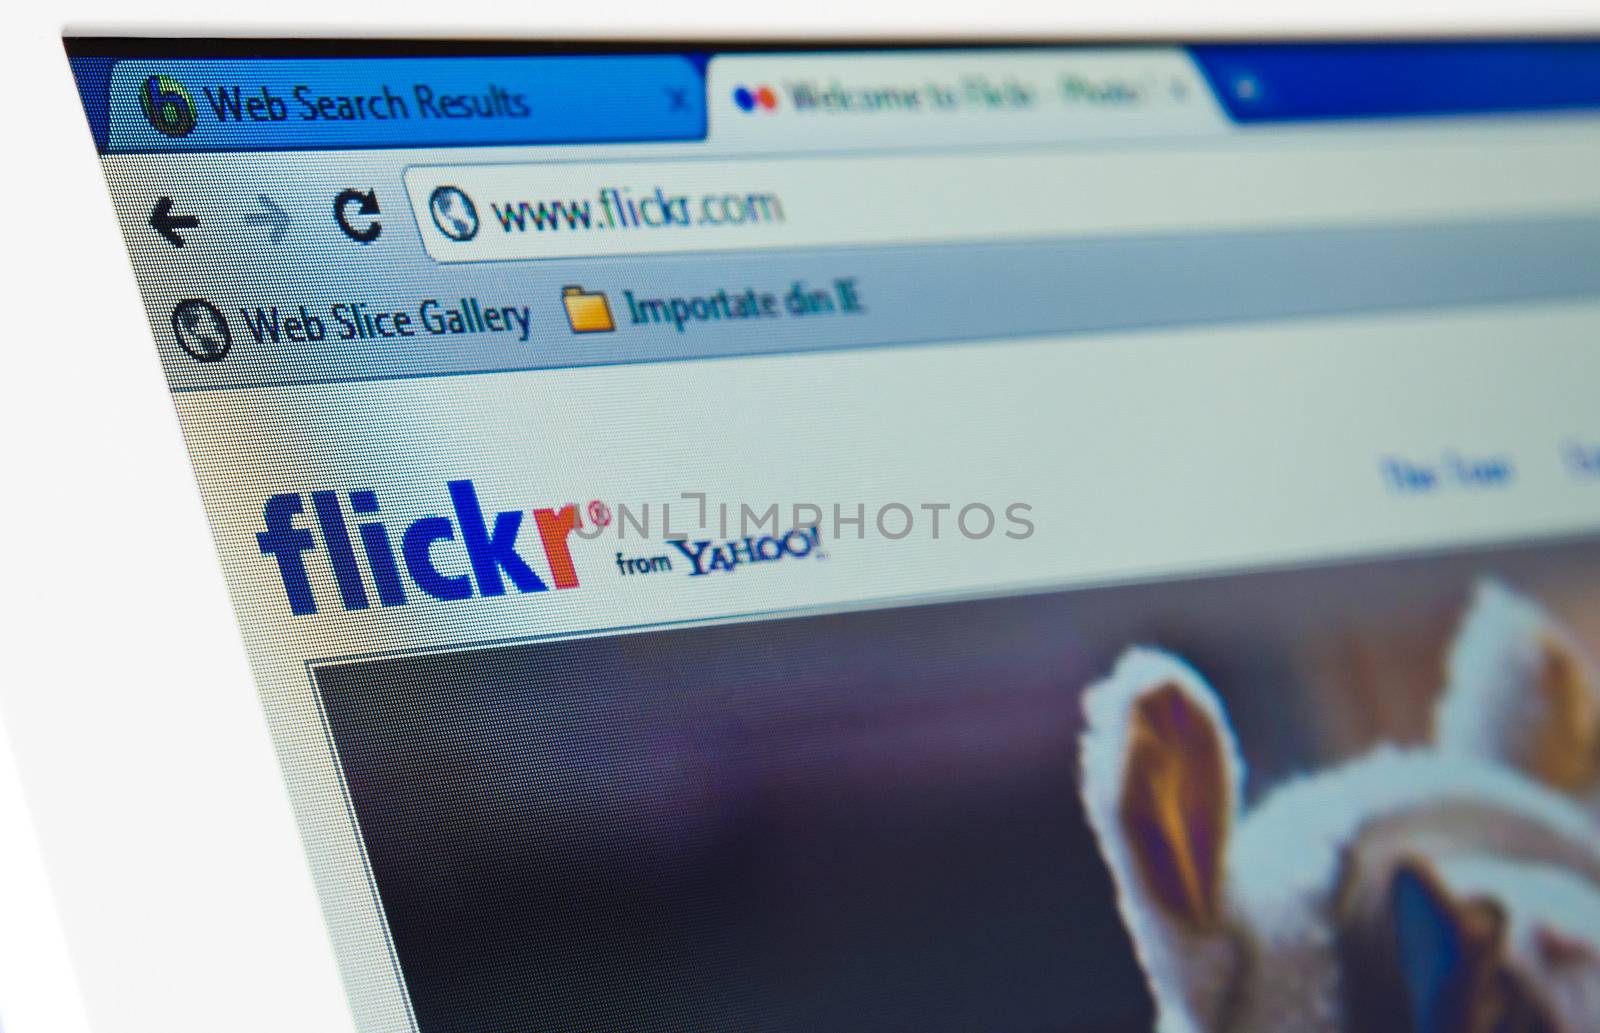 Flickr by manaemedia